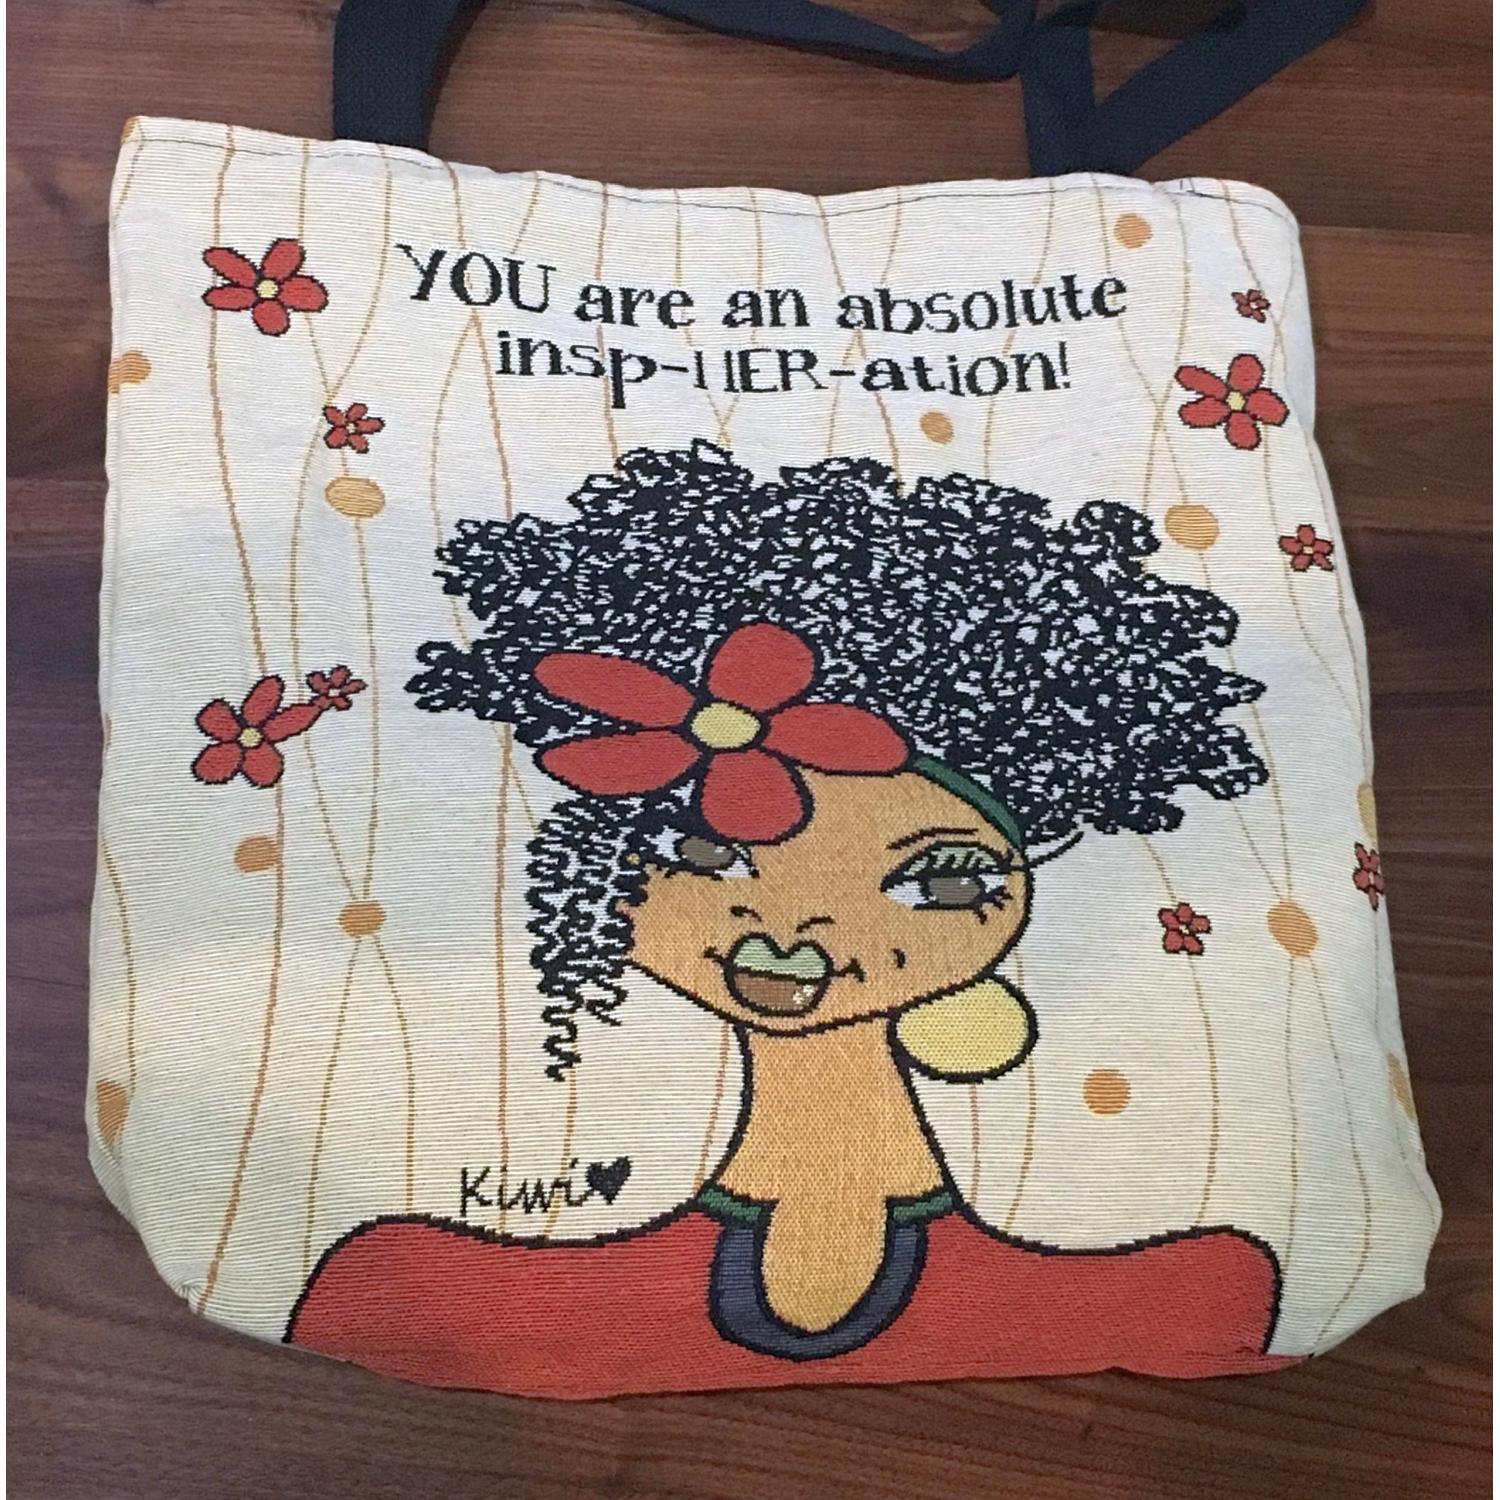 2 of 3: You Are an Insp-HER-ation: African American Woven Tote Bag by Kiwi McDowell